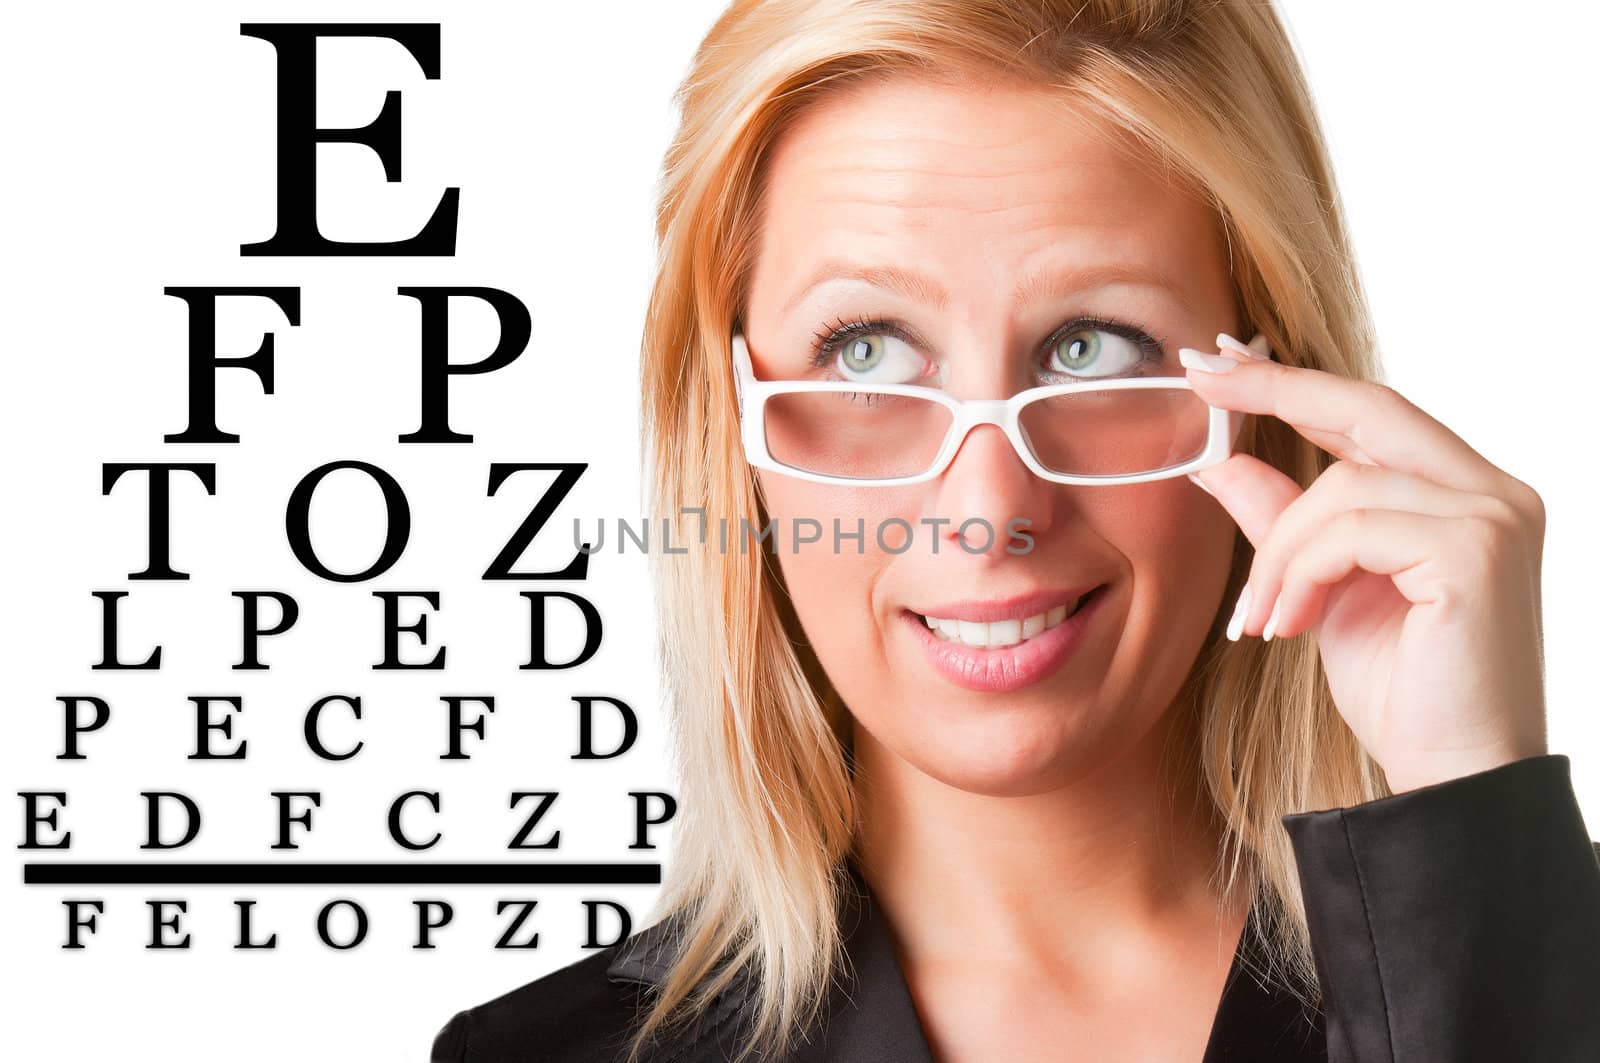 Worried bussinesswoman with glasses looking at an eyechart, isolated in a white background